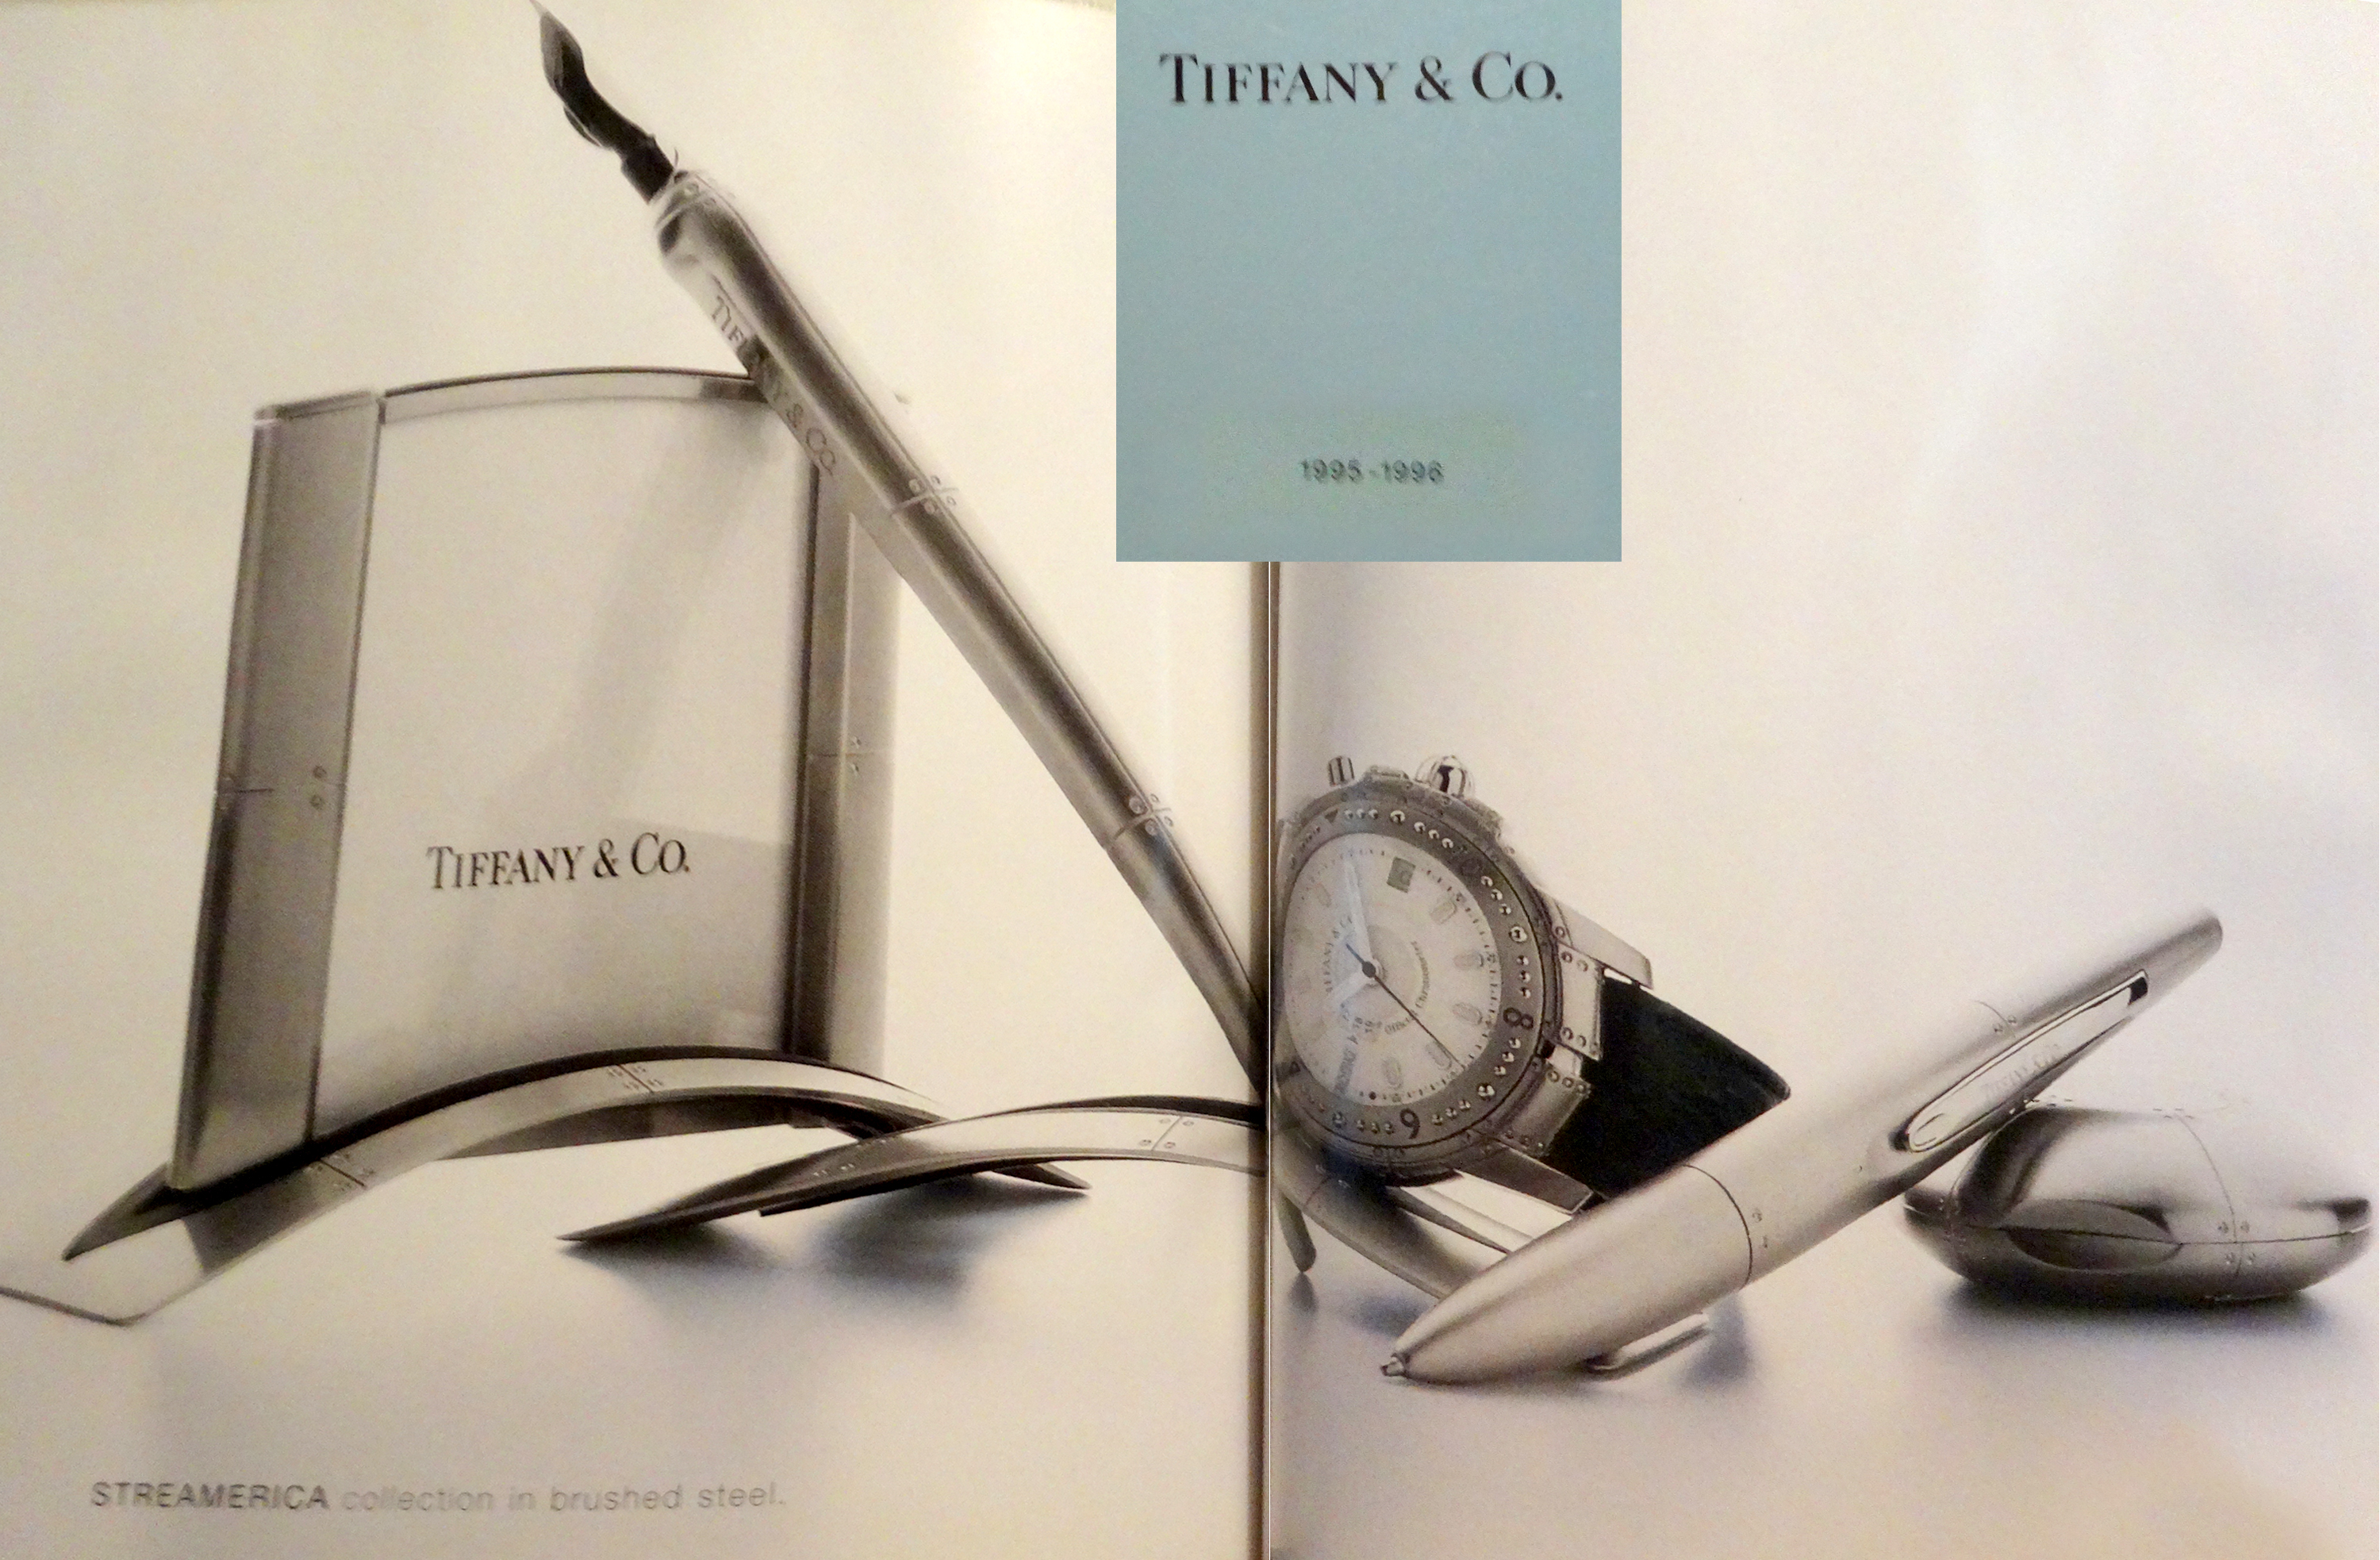 A Page from a 1995 Tiffany & Co. Blue Catalog showcasing Streamerica Stainless Steel Airframe Picture Frame Medium, Airframe dipping ink pen with stand, Automatic Watch with leather band, Ballpoint Pen, and Perisphere Nesting Box.